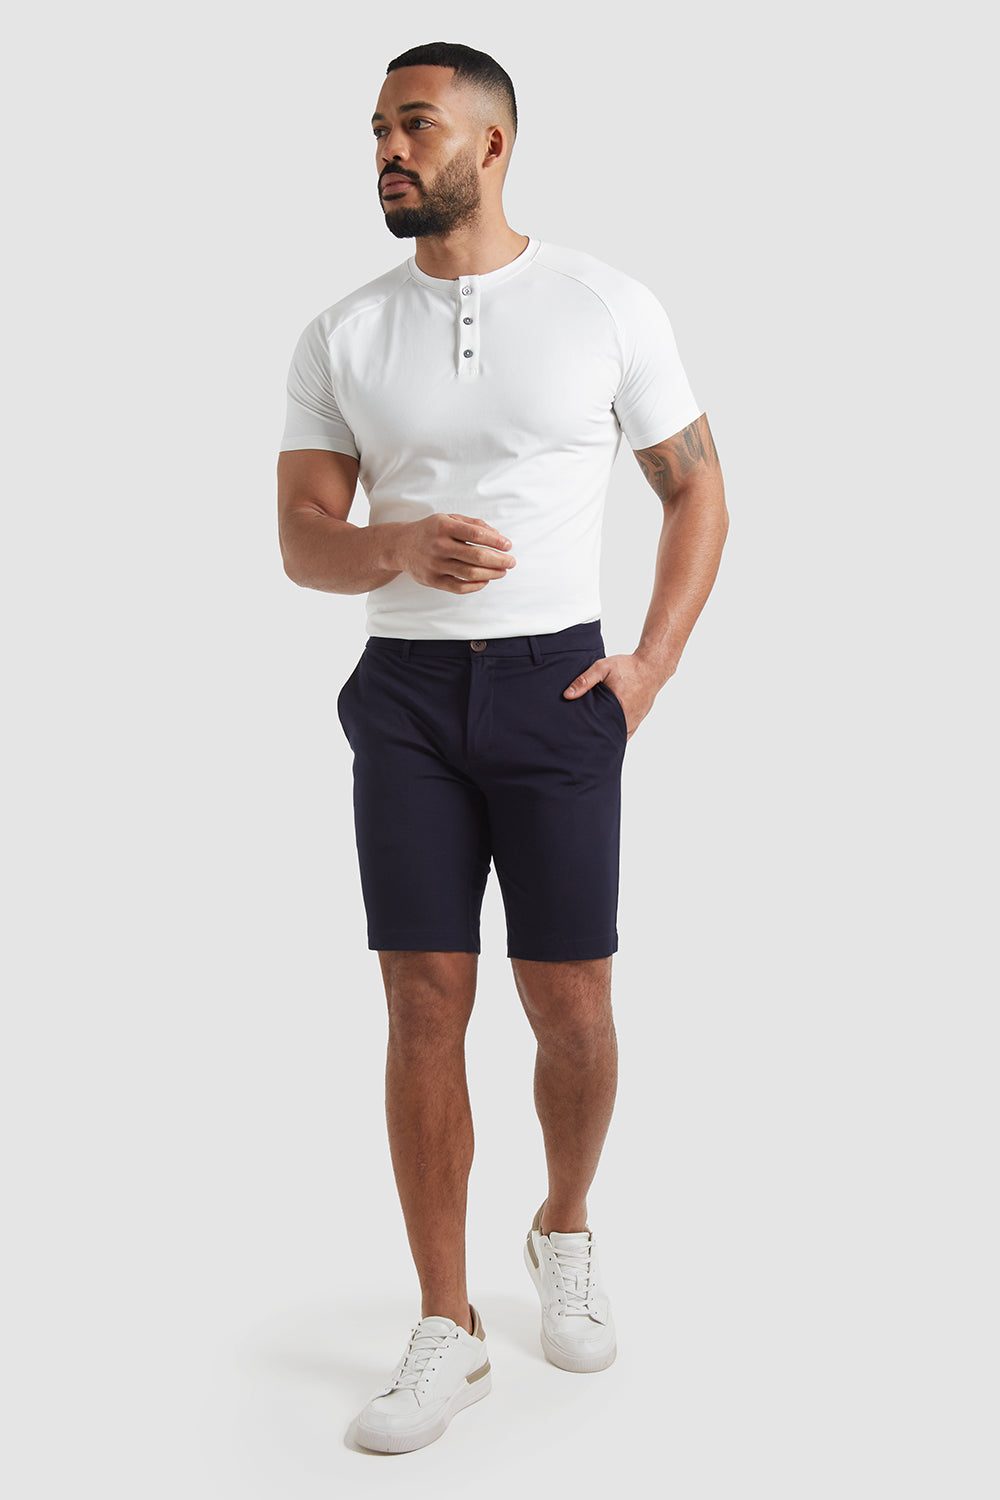 Athletic Fit Chino Shorts in - ATHLETE - USA TAILORED Navy